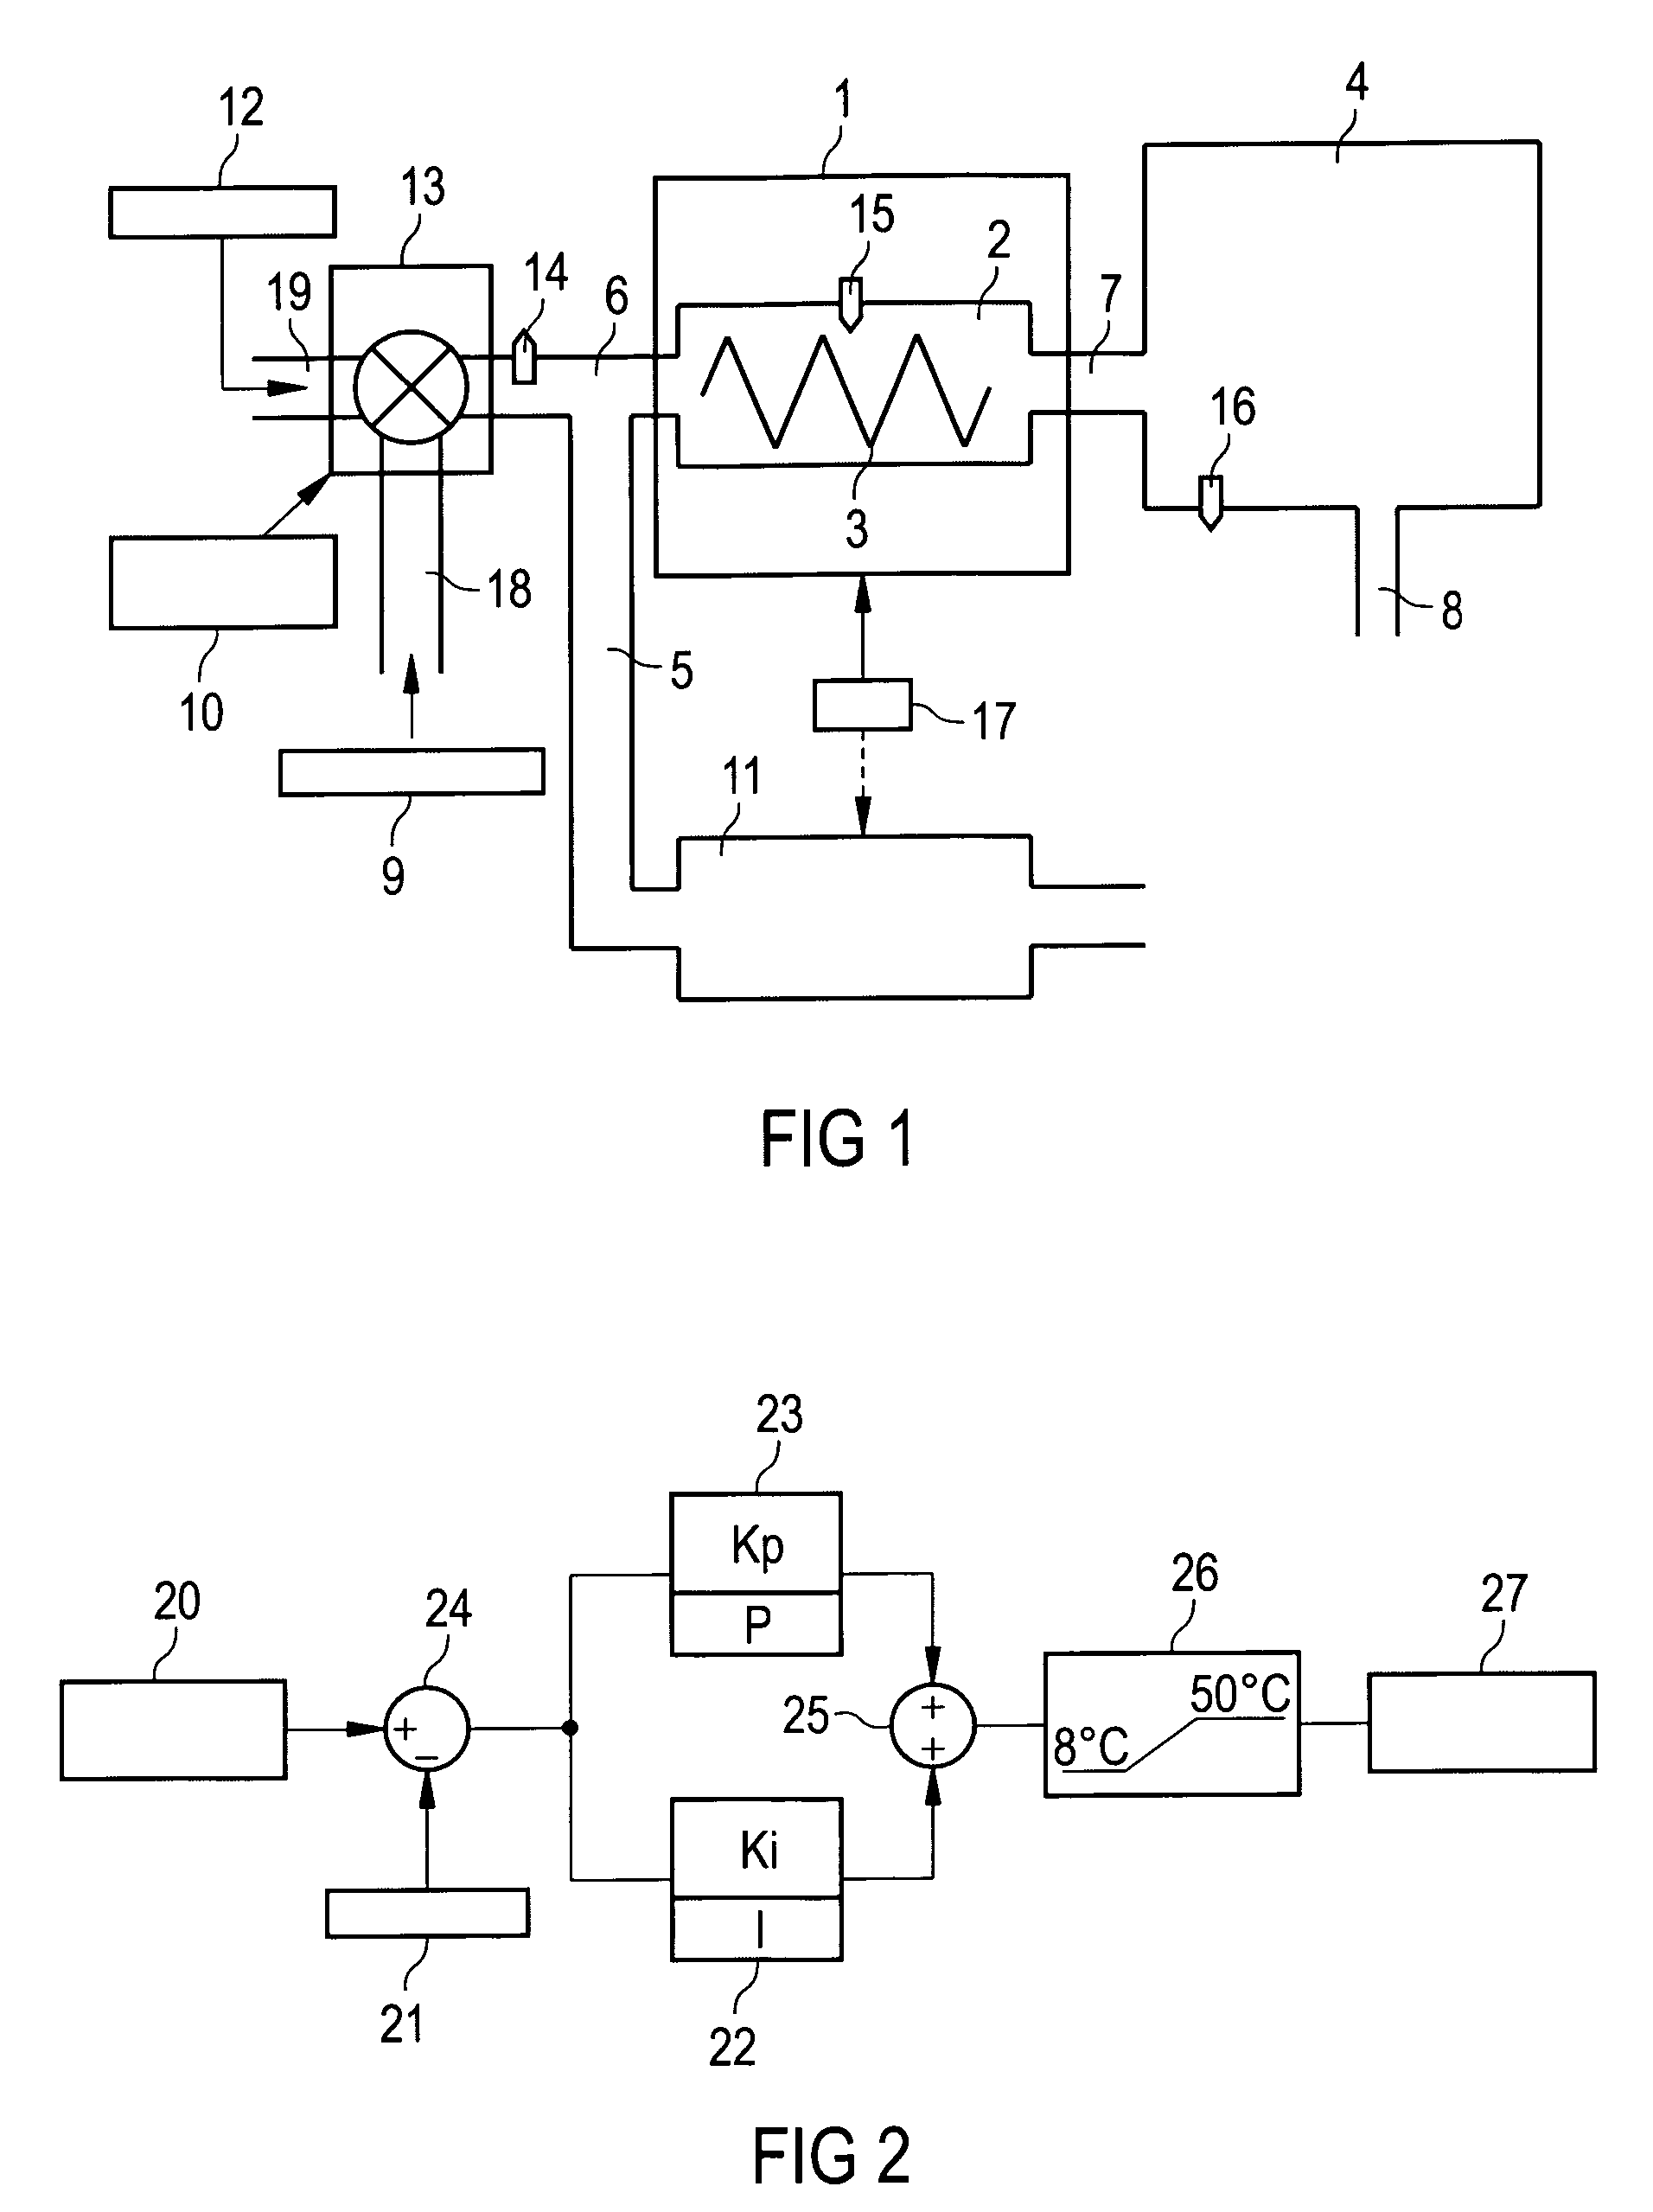 Fuzzy-logic based controller to regulate aircraft temperature